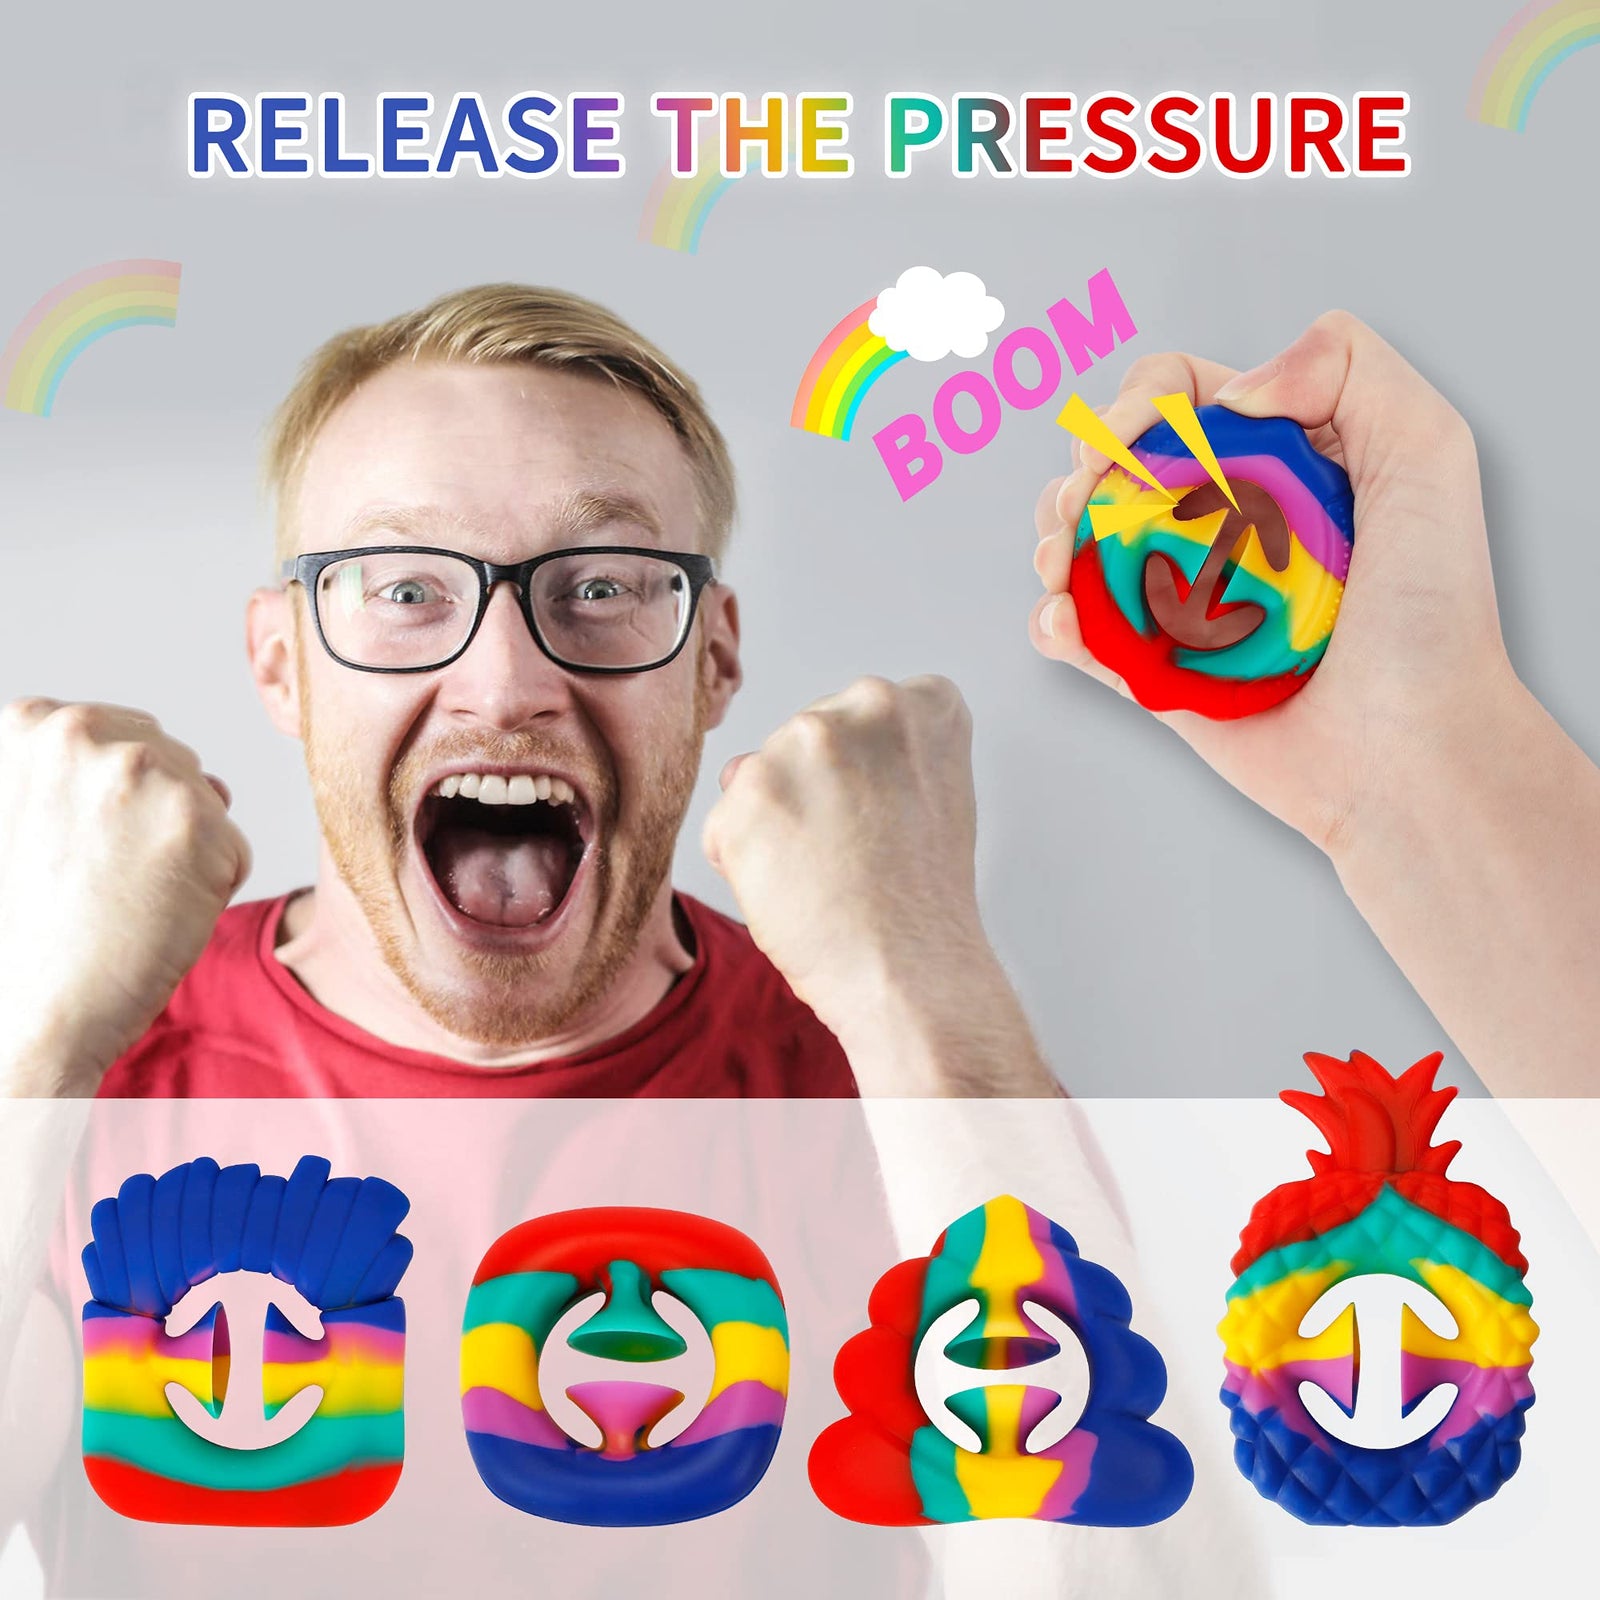 5 Pack Finger Sensory Toy Fidget Snapper Pack, Snap Grip Grab Squeeze Toy for Stress Anxiety Relief, Miniature Novelty Party Popper Noise Maker Hands Toy for Kids Adult ADHD Snap it Rainbow Colorful